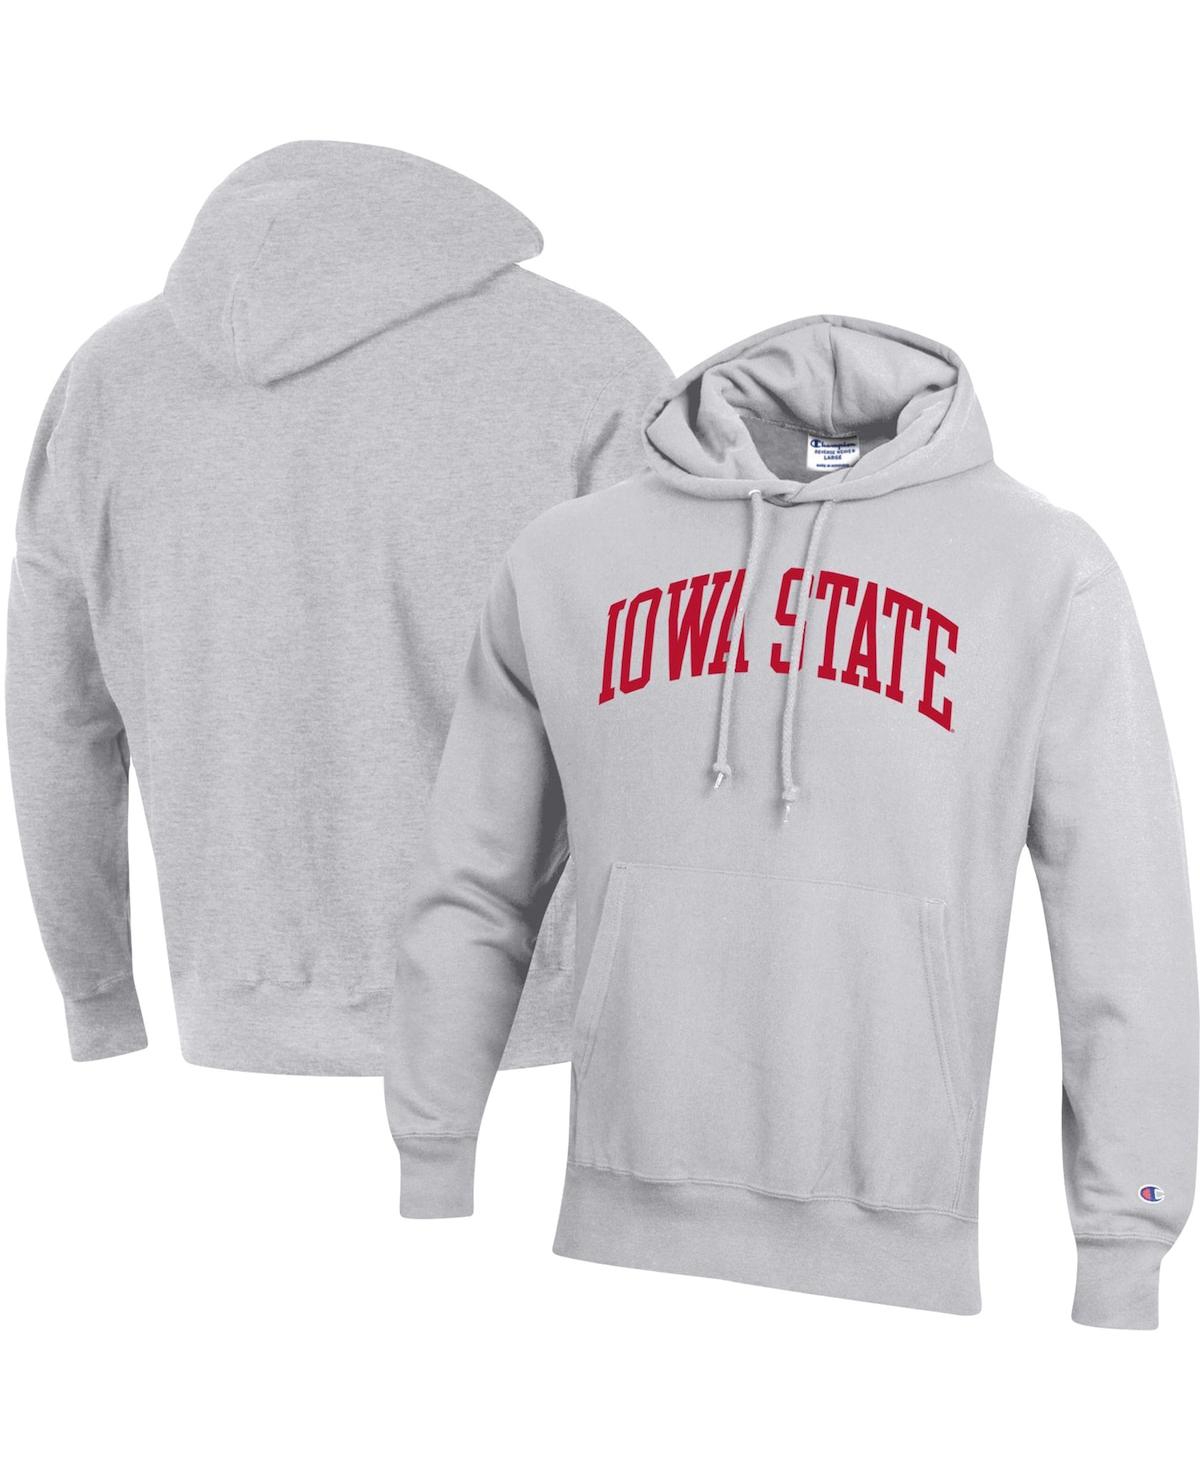 Shop Champion Men's  Heathered Gray Iowa State Cyclones Team Arch Reverse Weave Pullover Hoodie